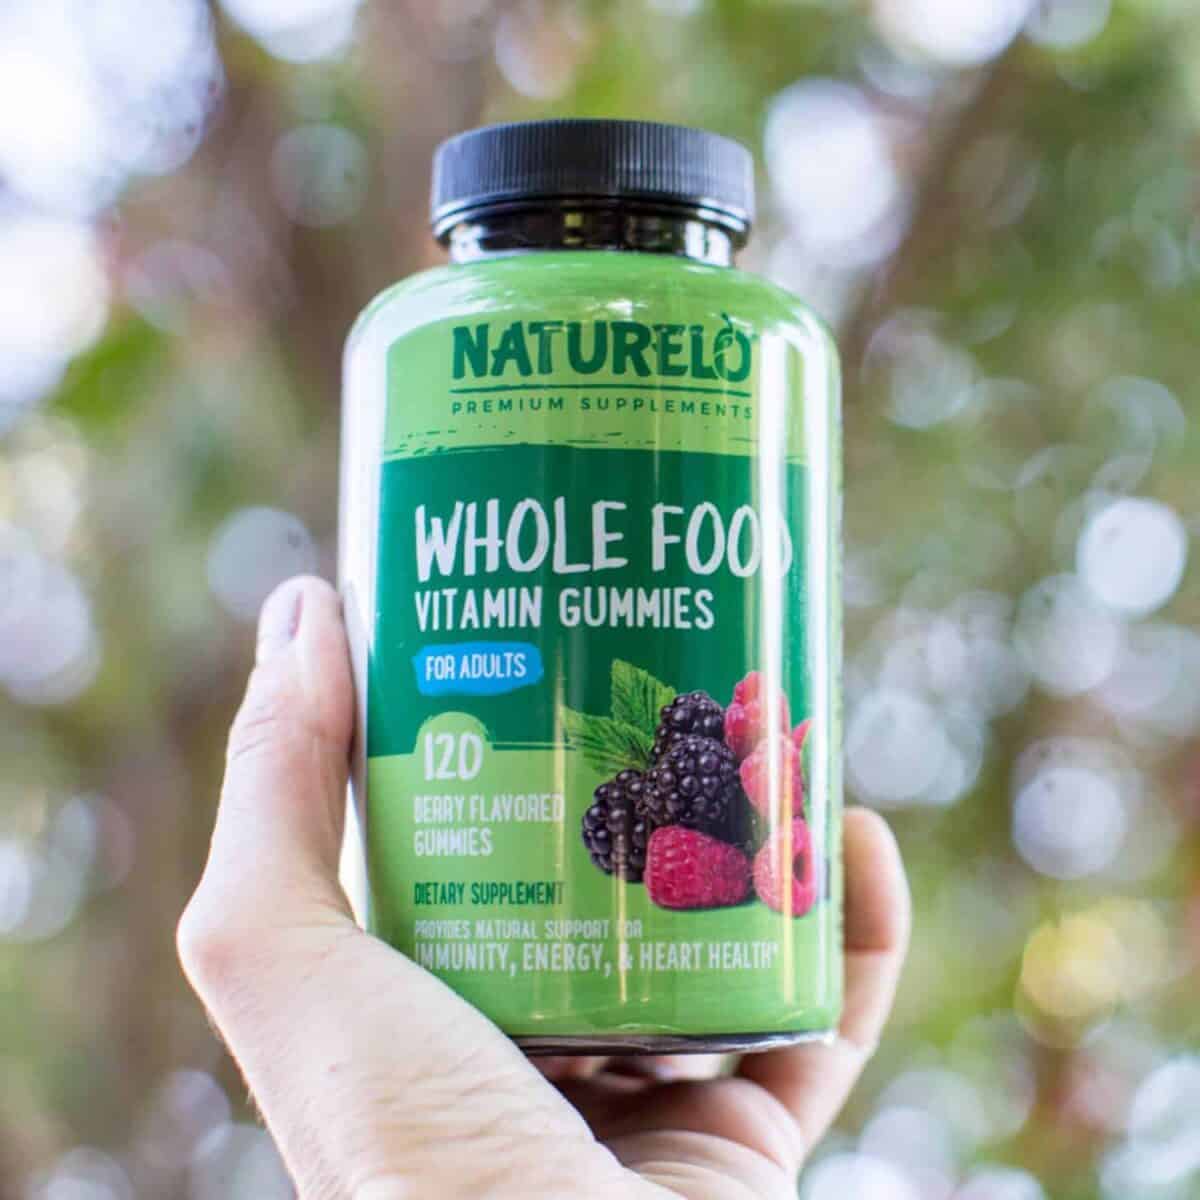 Vegan whole food gummy vitamins from naturelo for adults.